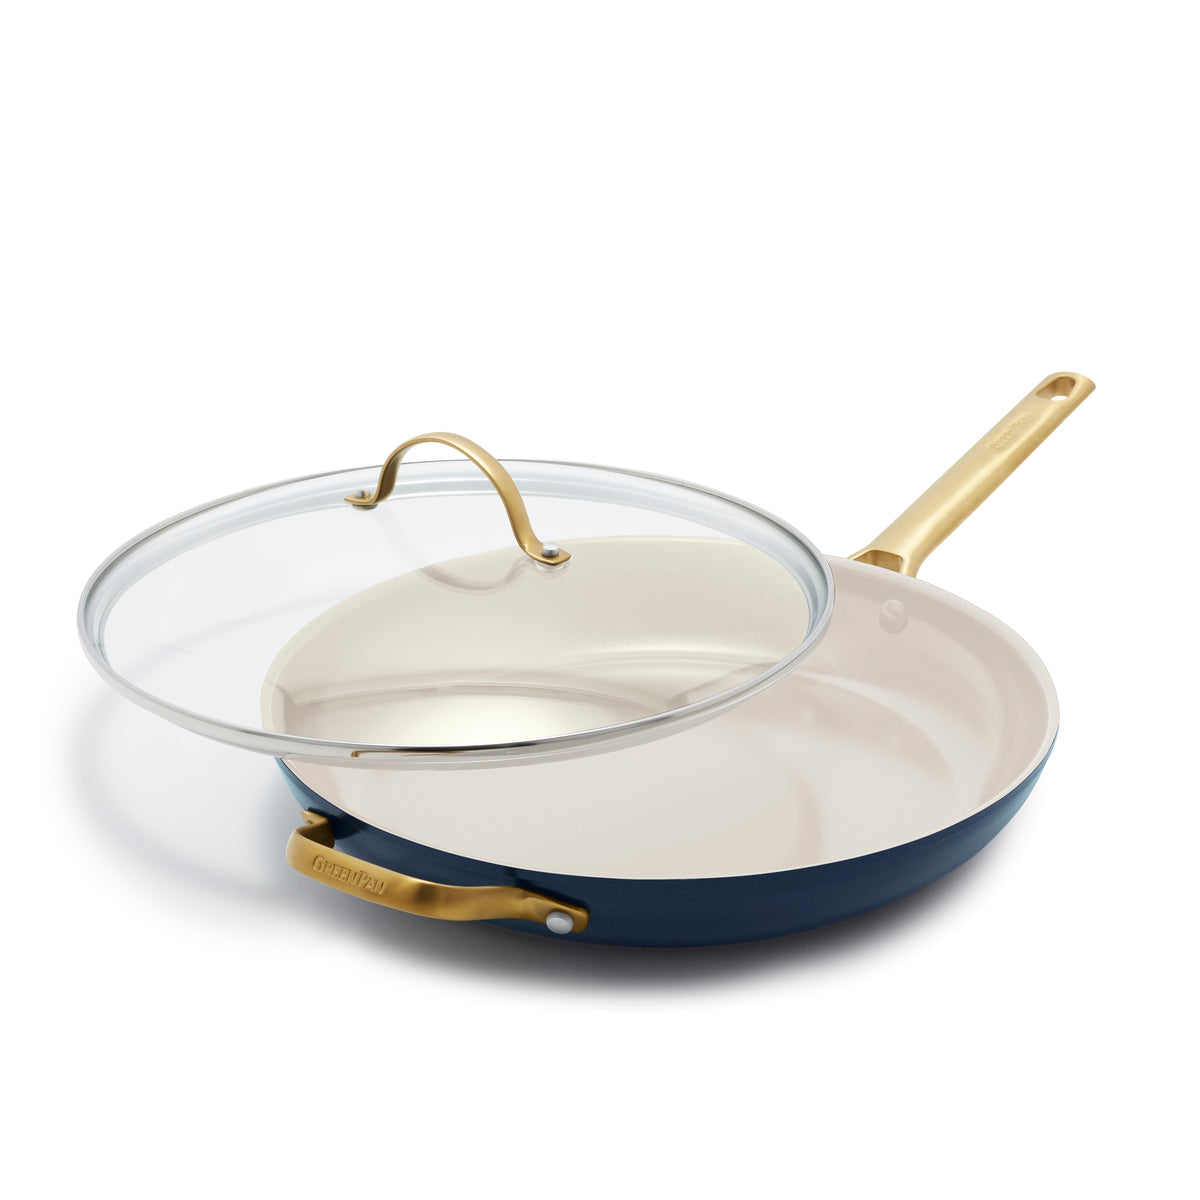 Blue Diamond Ceramic Non-Stick Covered Skillet with Lid 12in